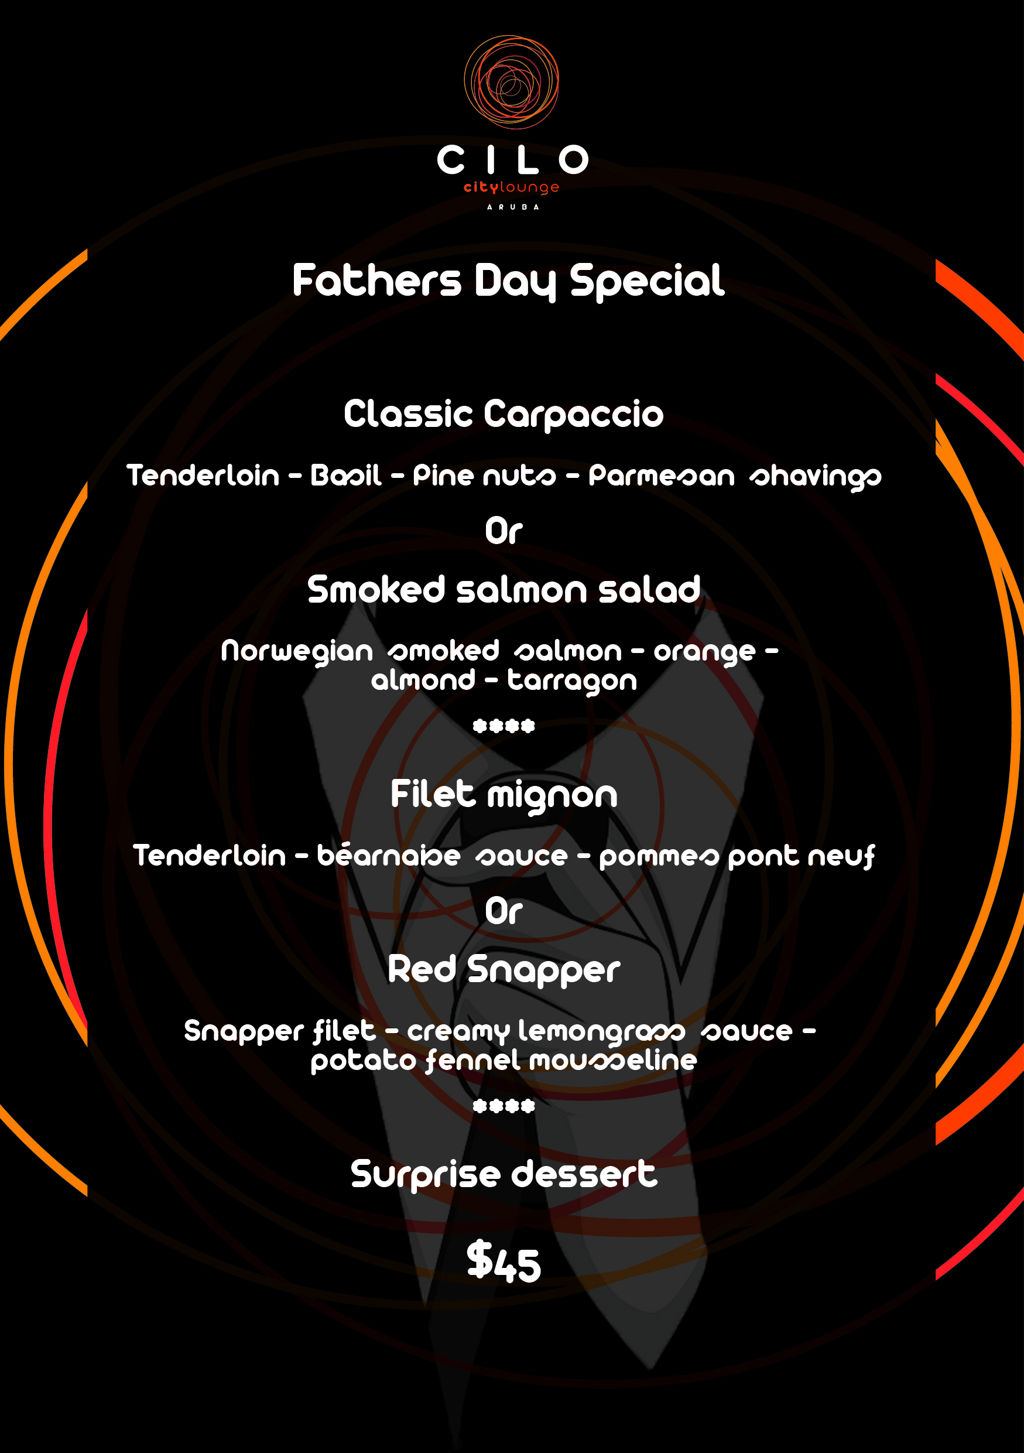 Fathersday Special.jpg